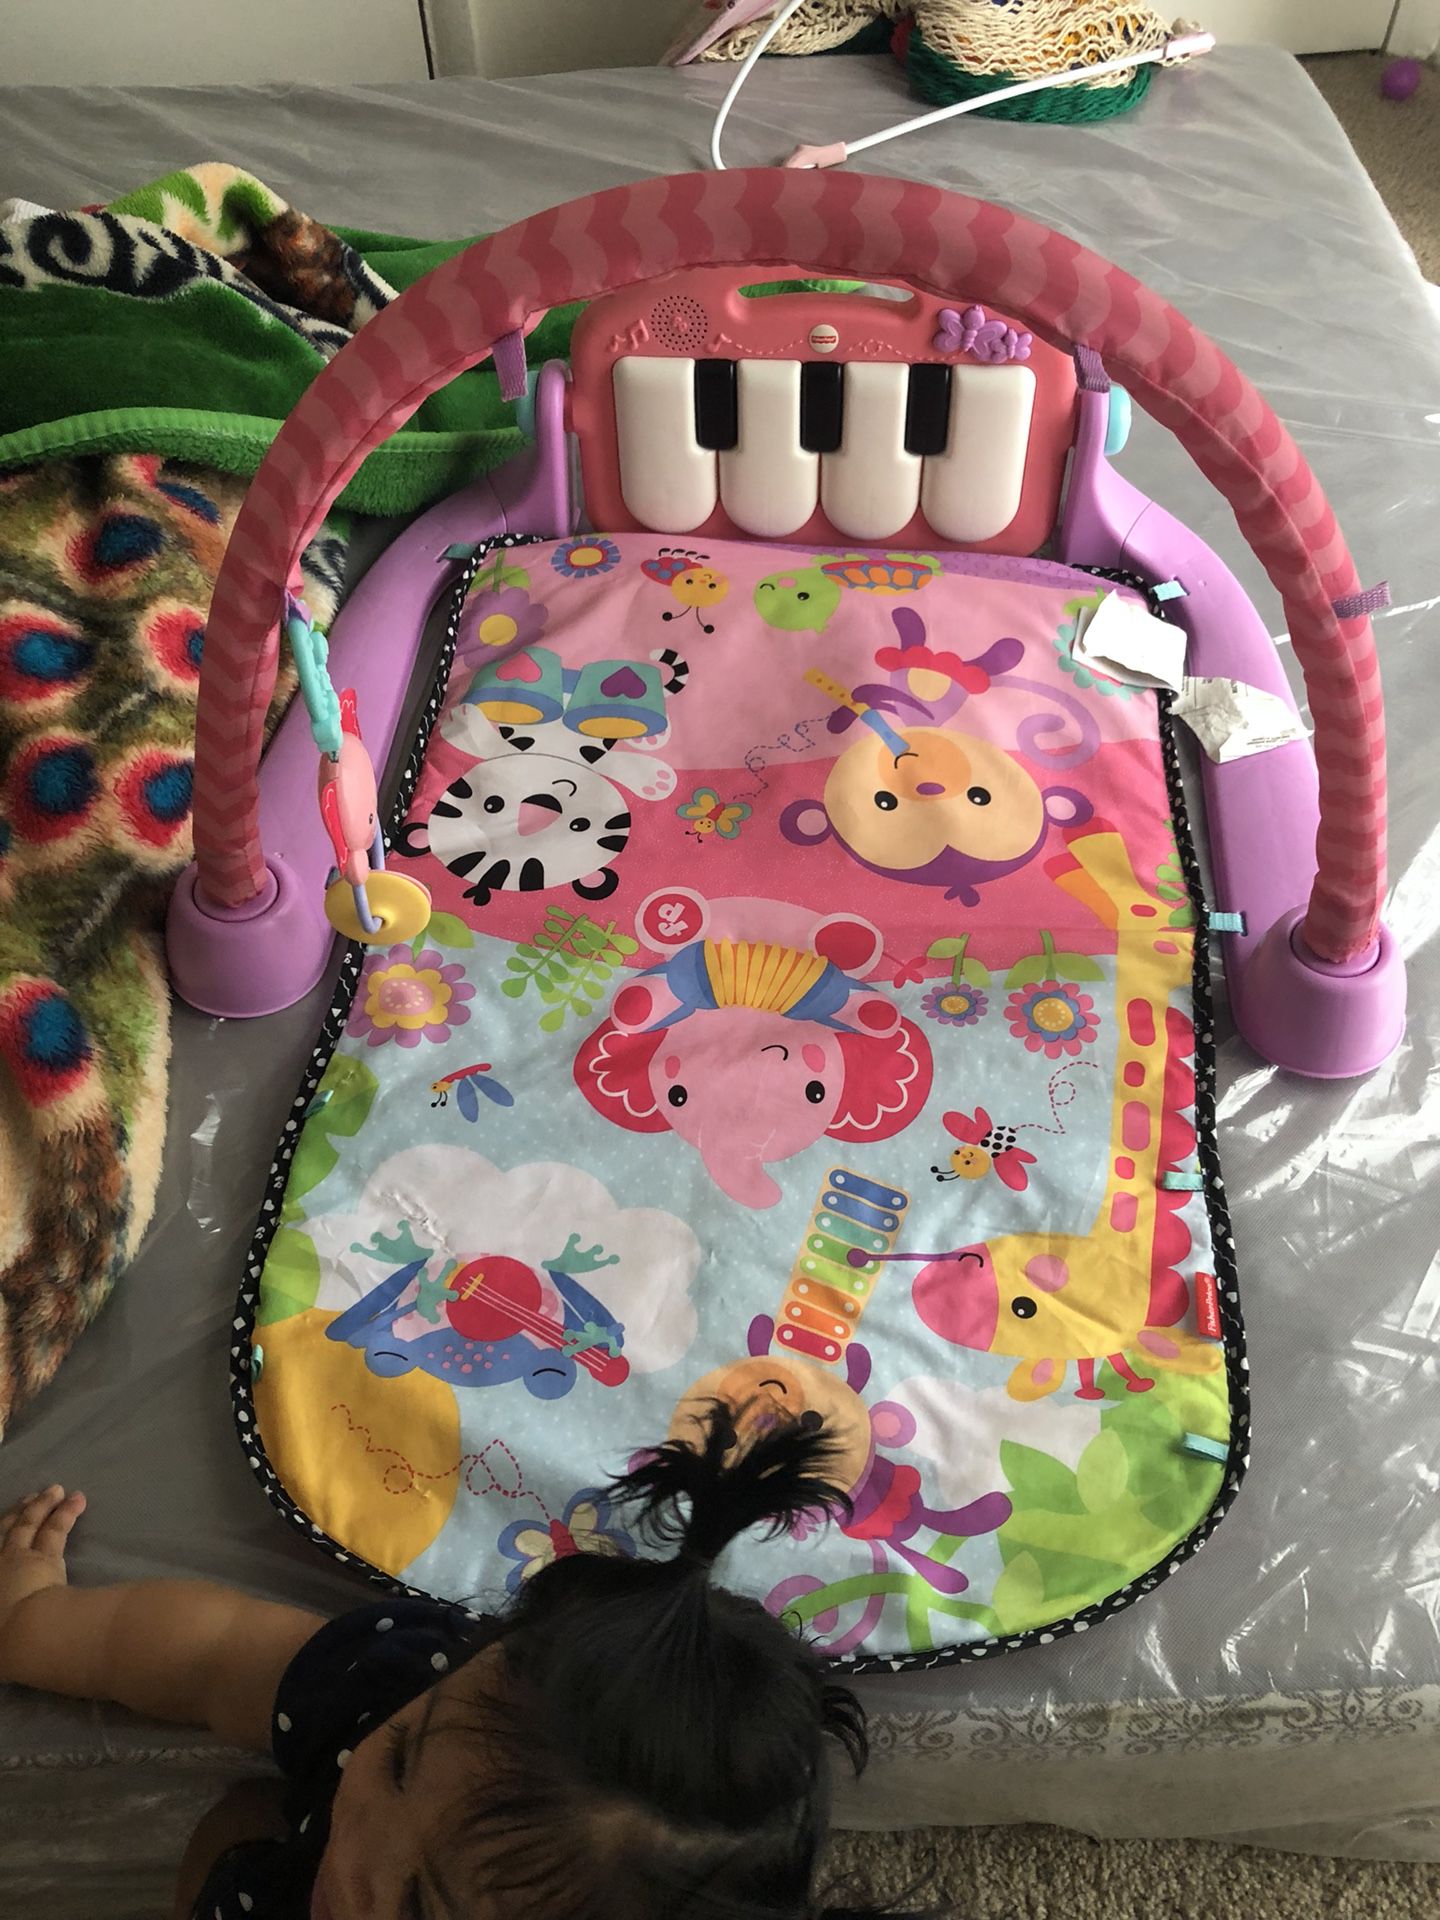 Baby toy and high chair